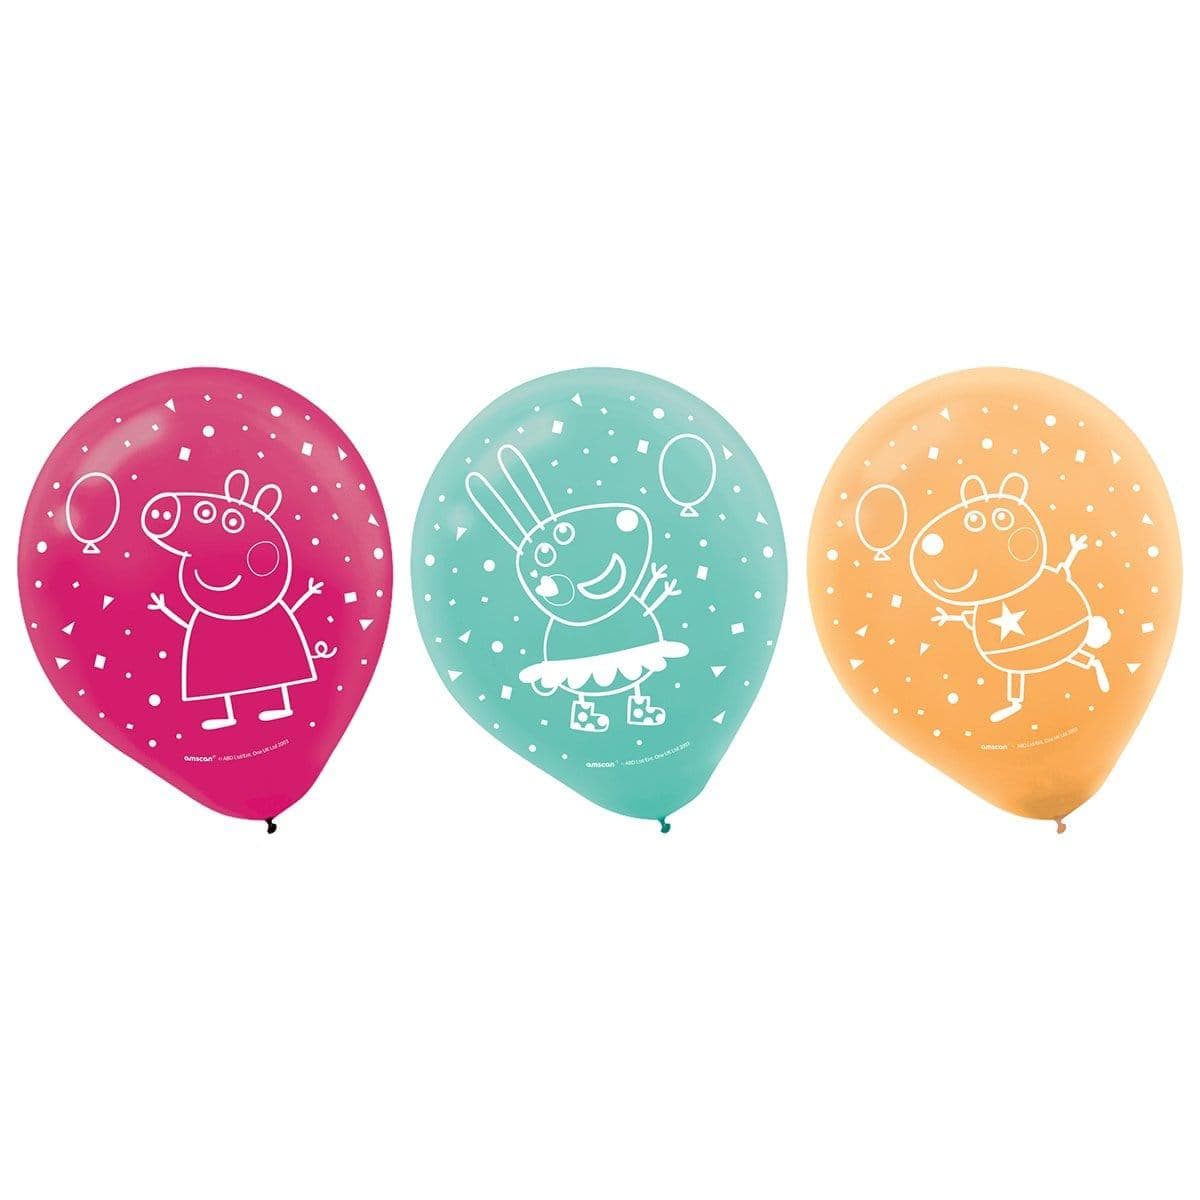 Buy Kids Birthday Peppa Pig Confetti Latex Balloons 12 Inches, 6 Counts sold at Party Expert